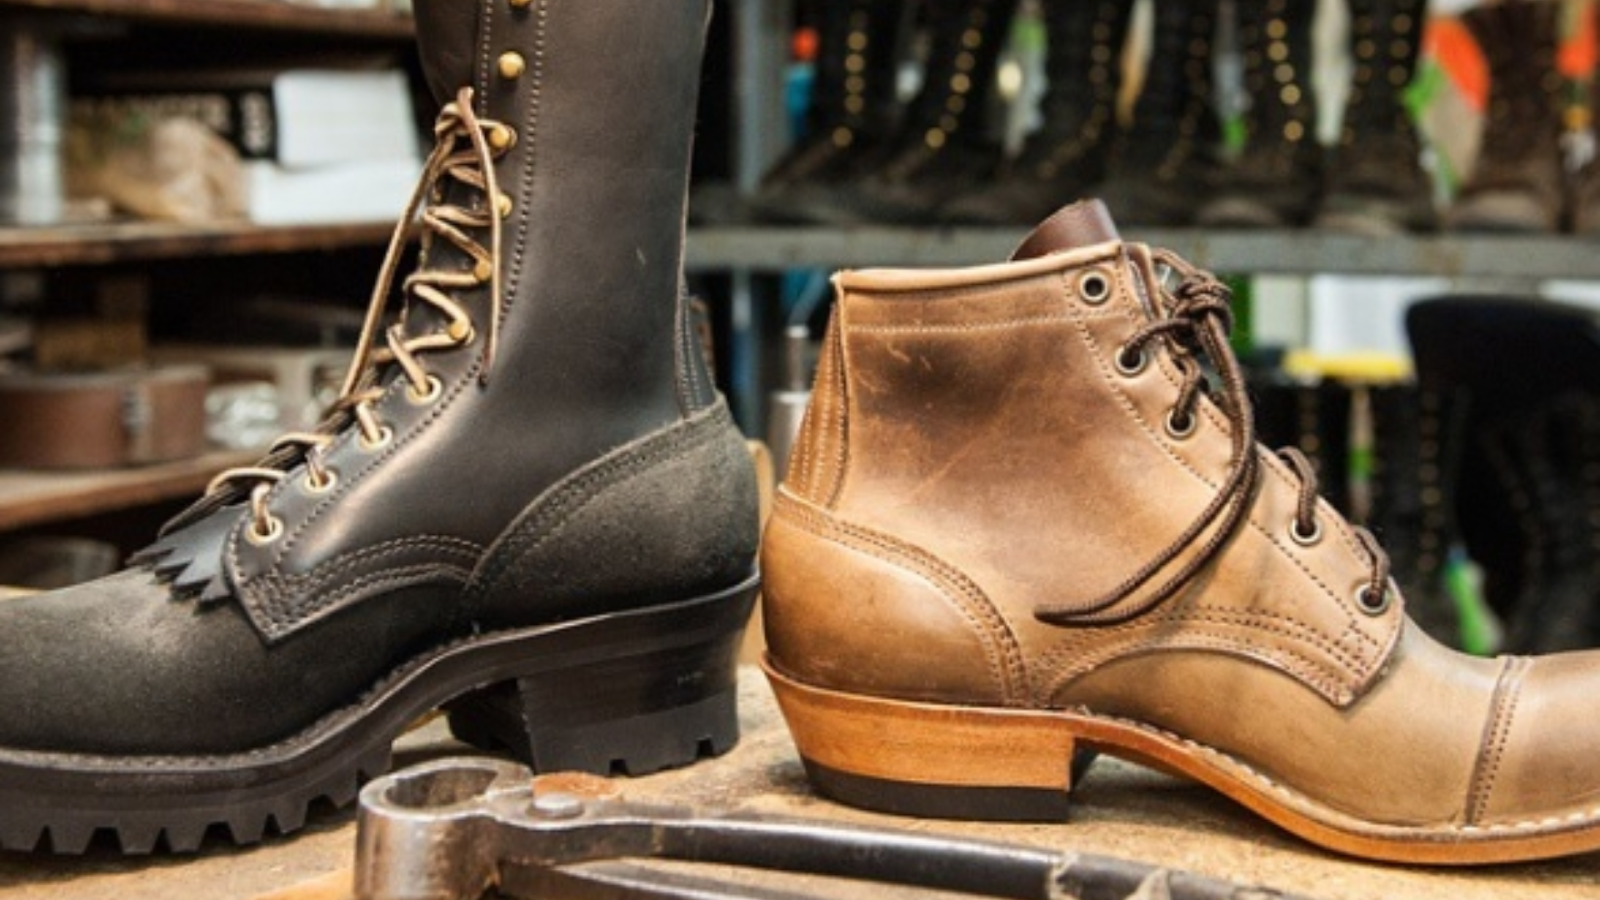 Importance Of Choosing The Right Work Boots